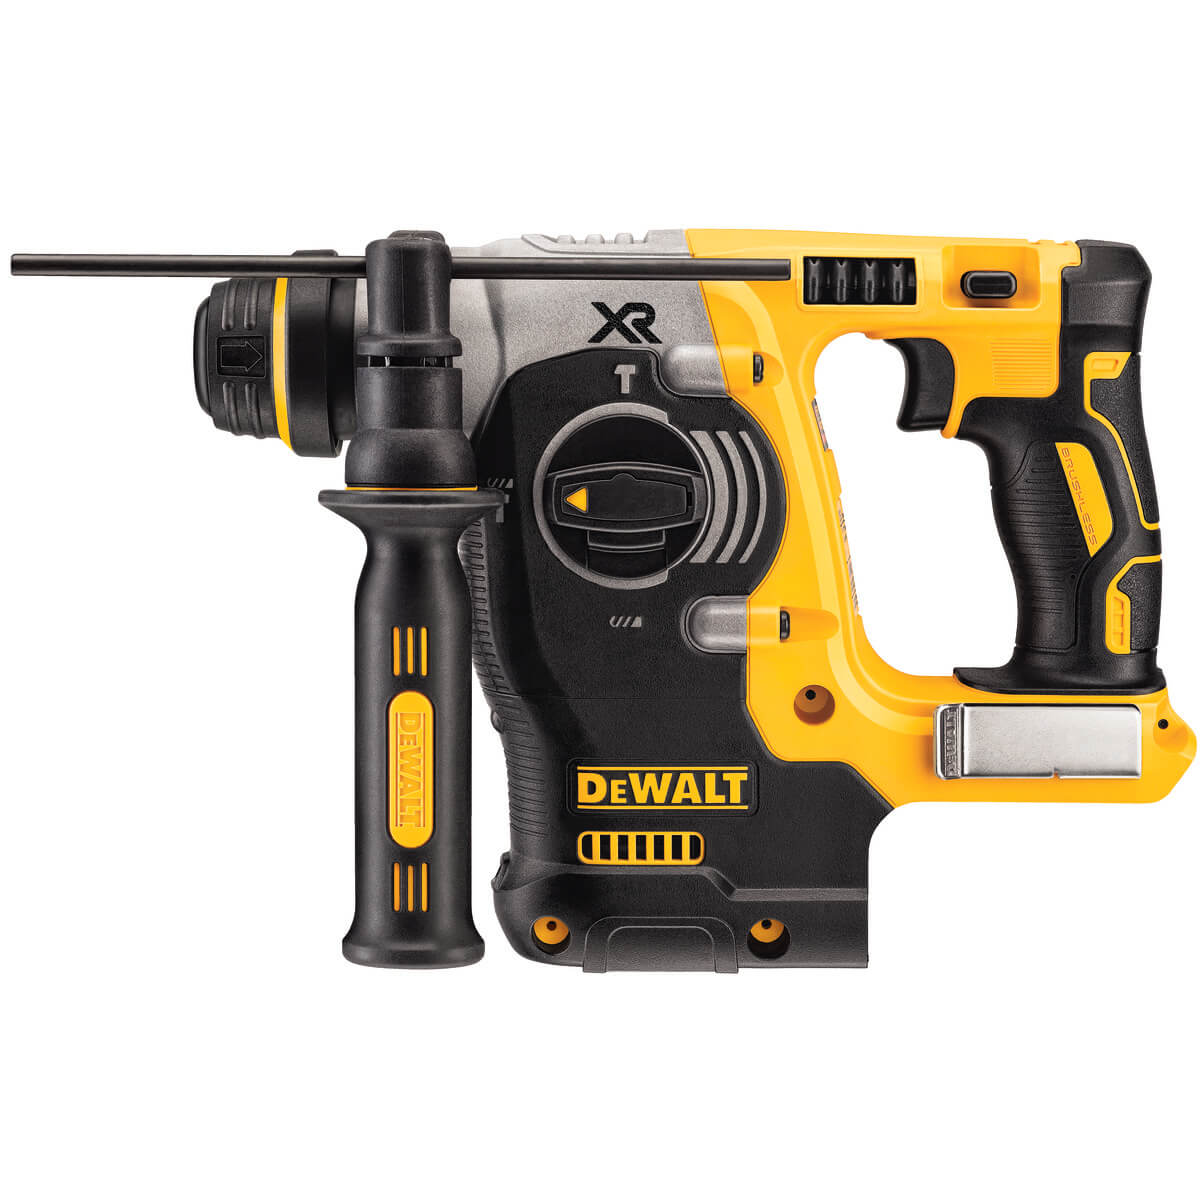 DEWALT DCH273B 20V Max Brushless SDS Rotary Hammer Bare Tool - wise-line-tools